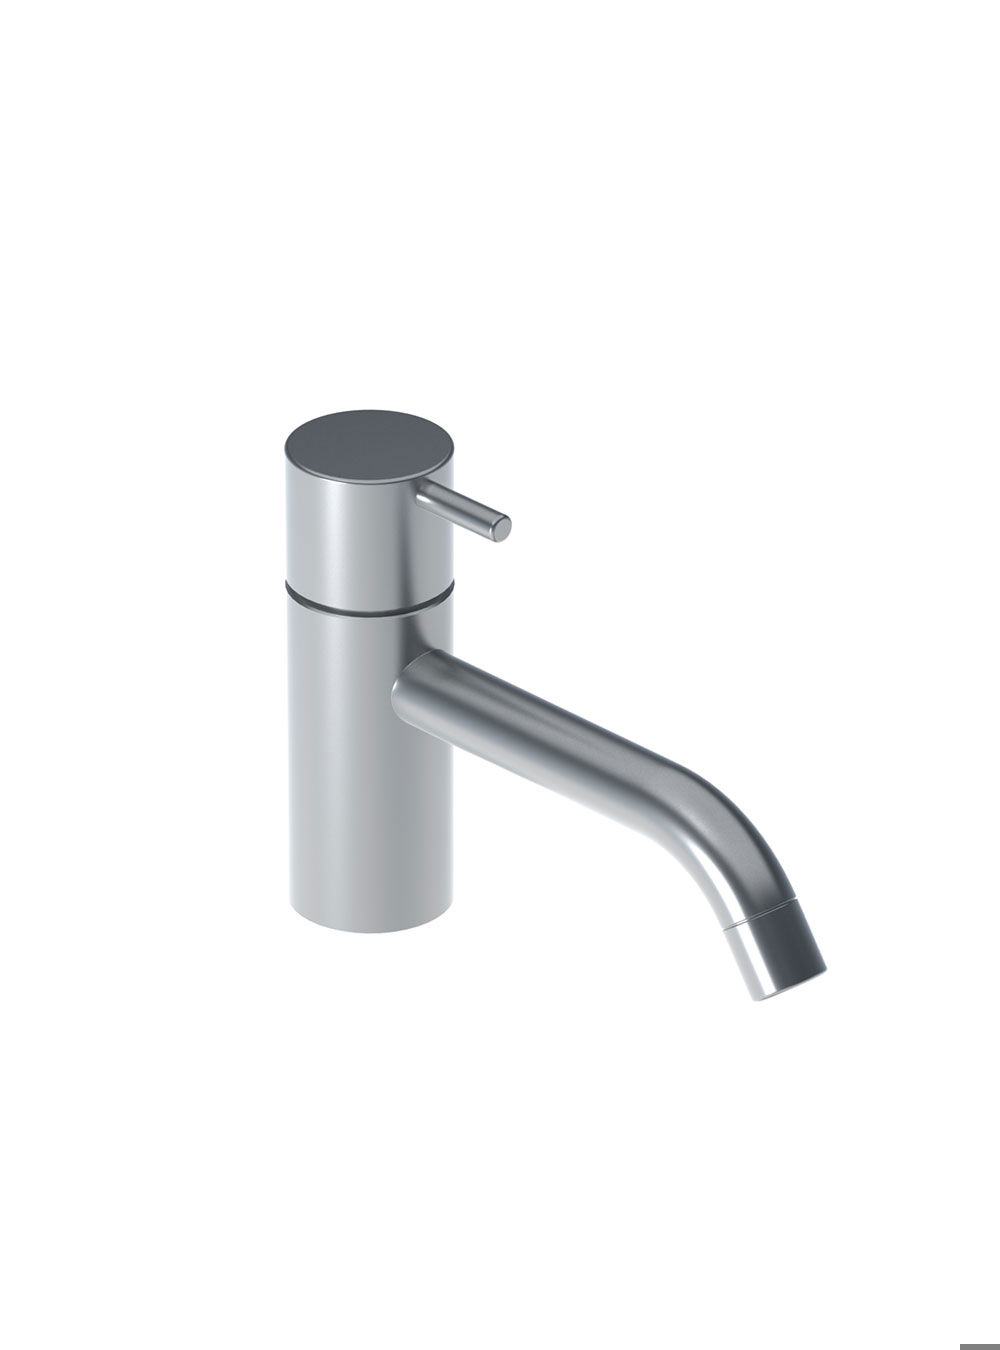 RB1/150: Pillar tap for cold water, with ¼ turn ceramic disc technology, fixed spout with spout projection 15